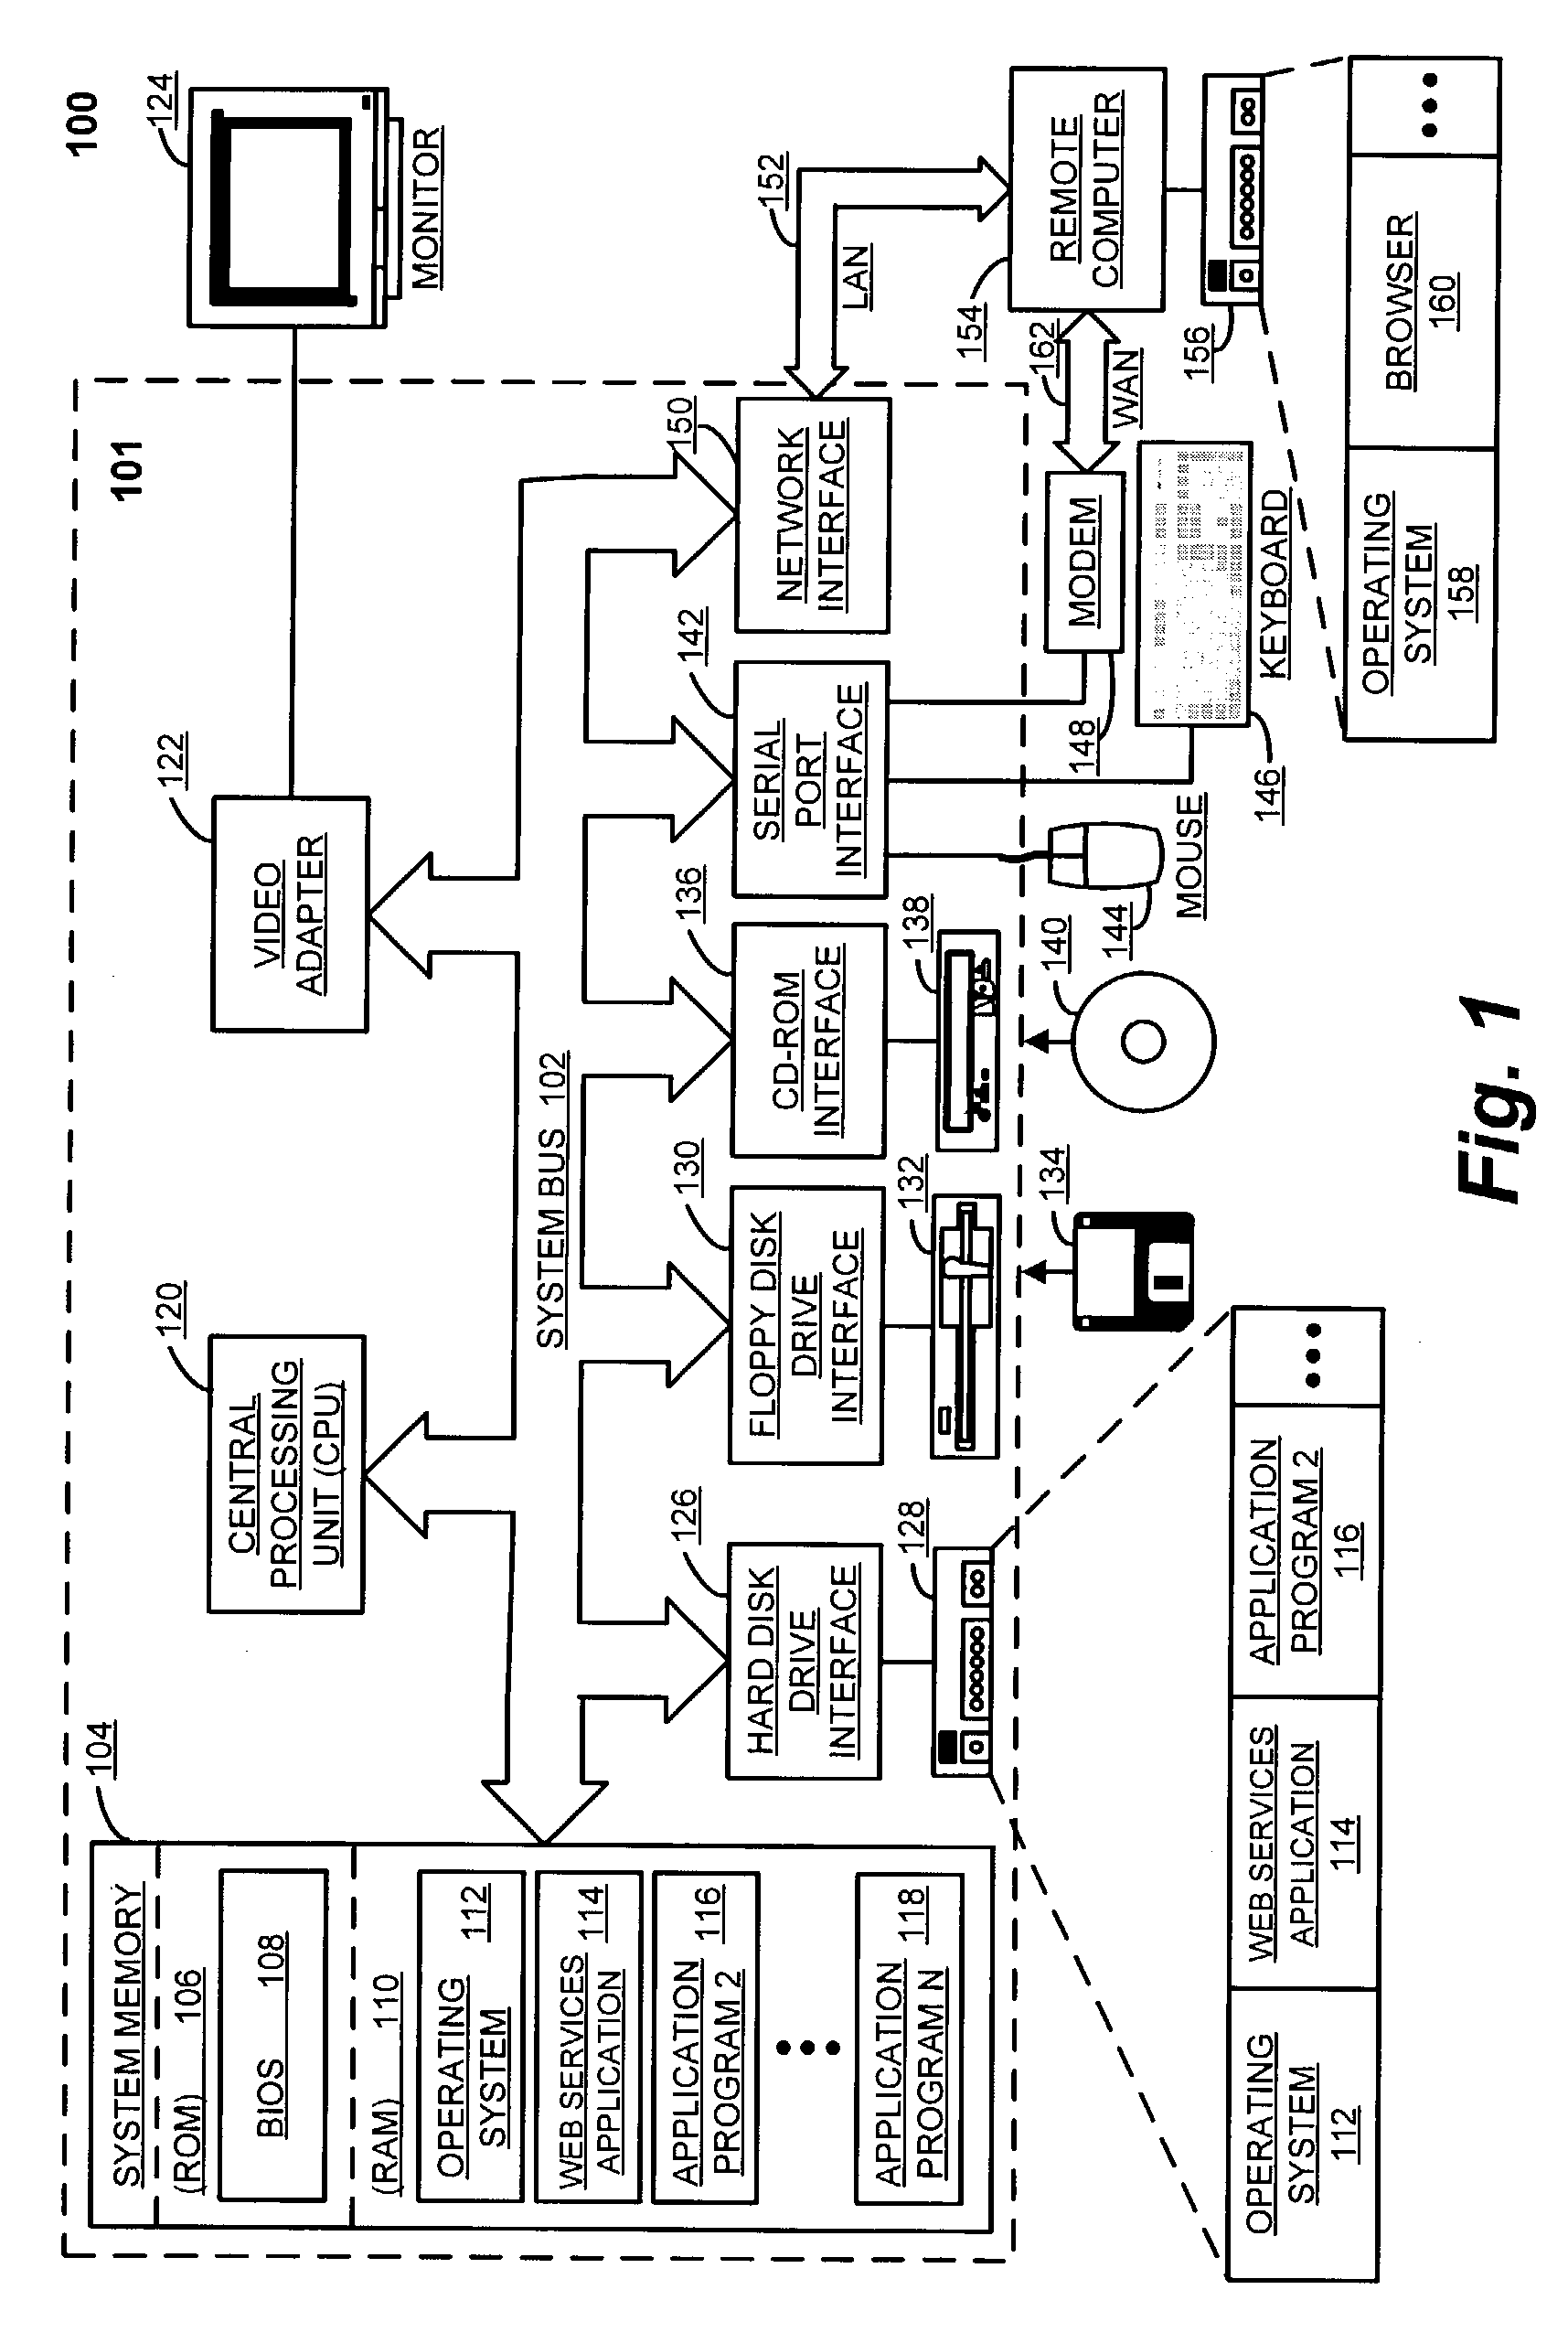 Method for mitigating web-based "one-click" attacks